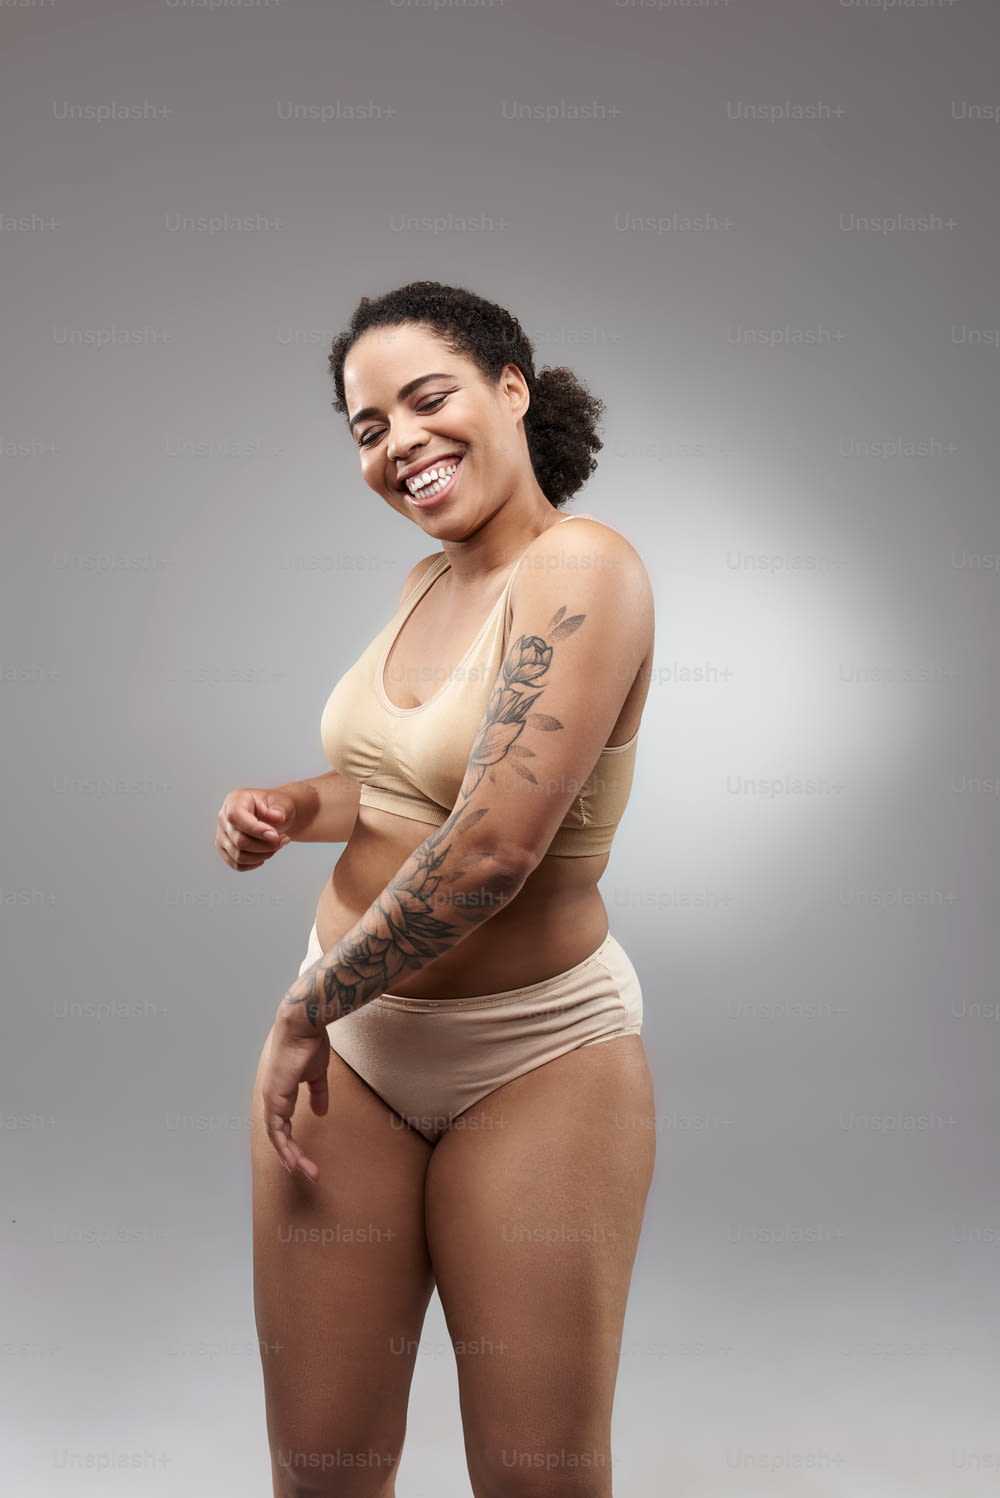 Smiling lady with curly hair wearing light underwear and showing her tattoo. Overweight concept